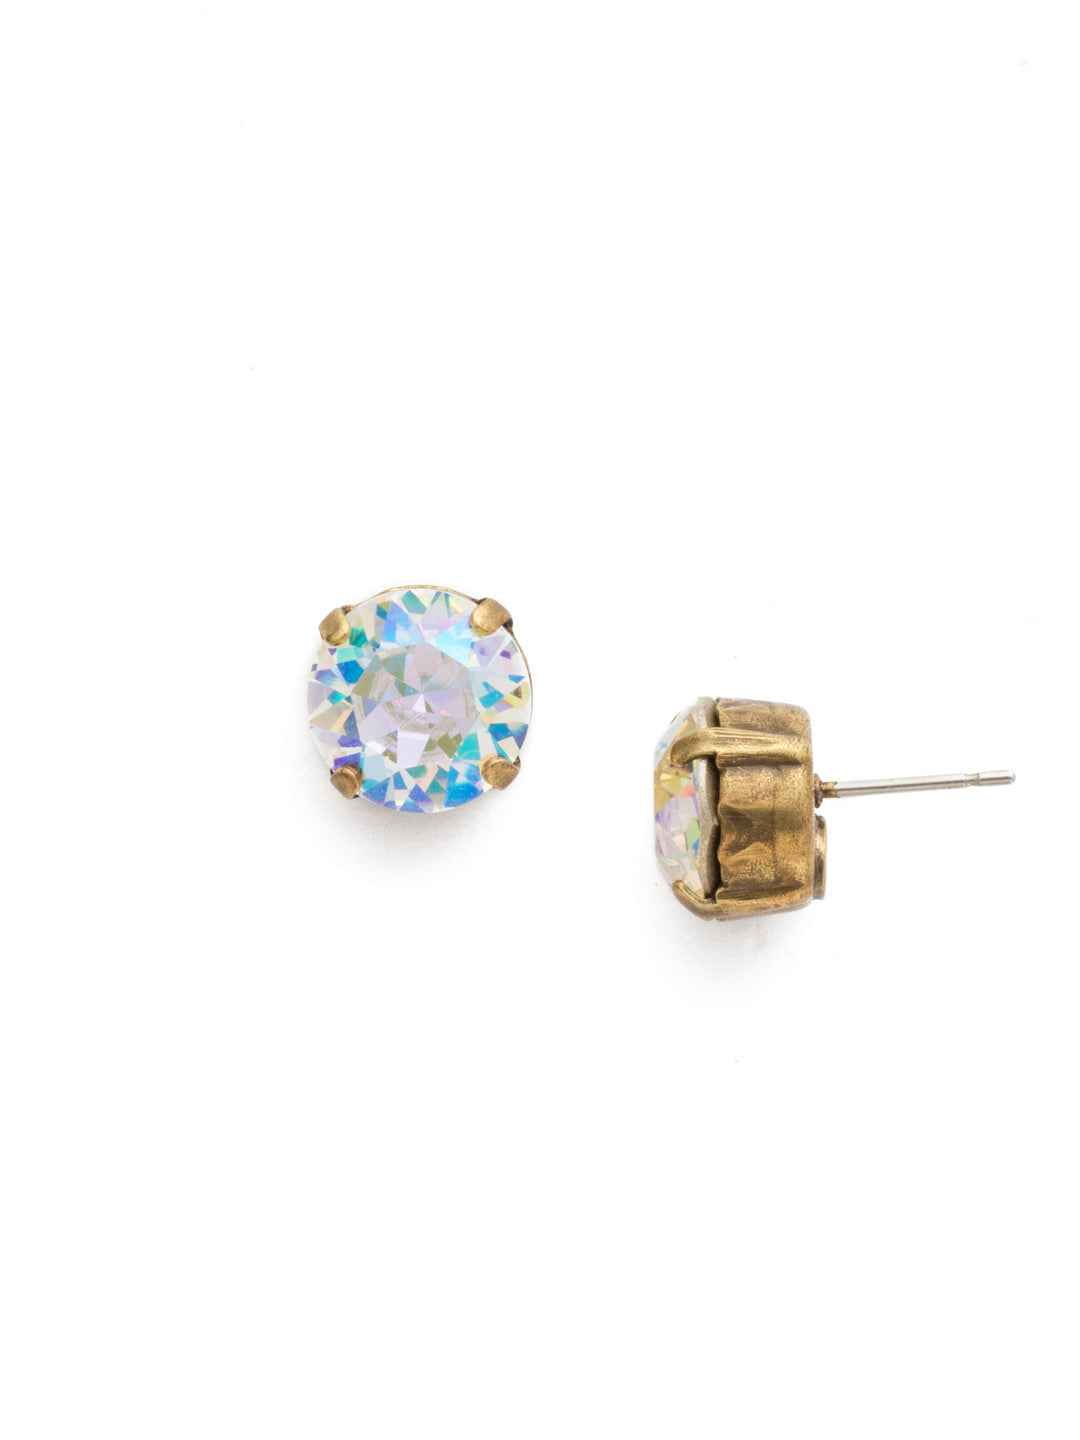 London Stud Earrings - ECM14AGCAB - <p>Everyone needs a great pair of studs. Add some classic sparkle to any occasion with these stud earrings. Need help picking a stud? <a href="https://www.sorrelli.com/blogs/sisterhood/round-stud-earrings-101-a-rundown-of-sizes-styles-and-sparkle">Check out our size guide!</a> From Sorrelli's Crystal Aurora Borealis collection in our Antique Gold-tone finish.</p>